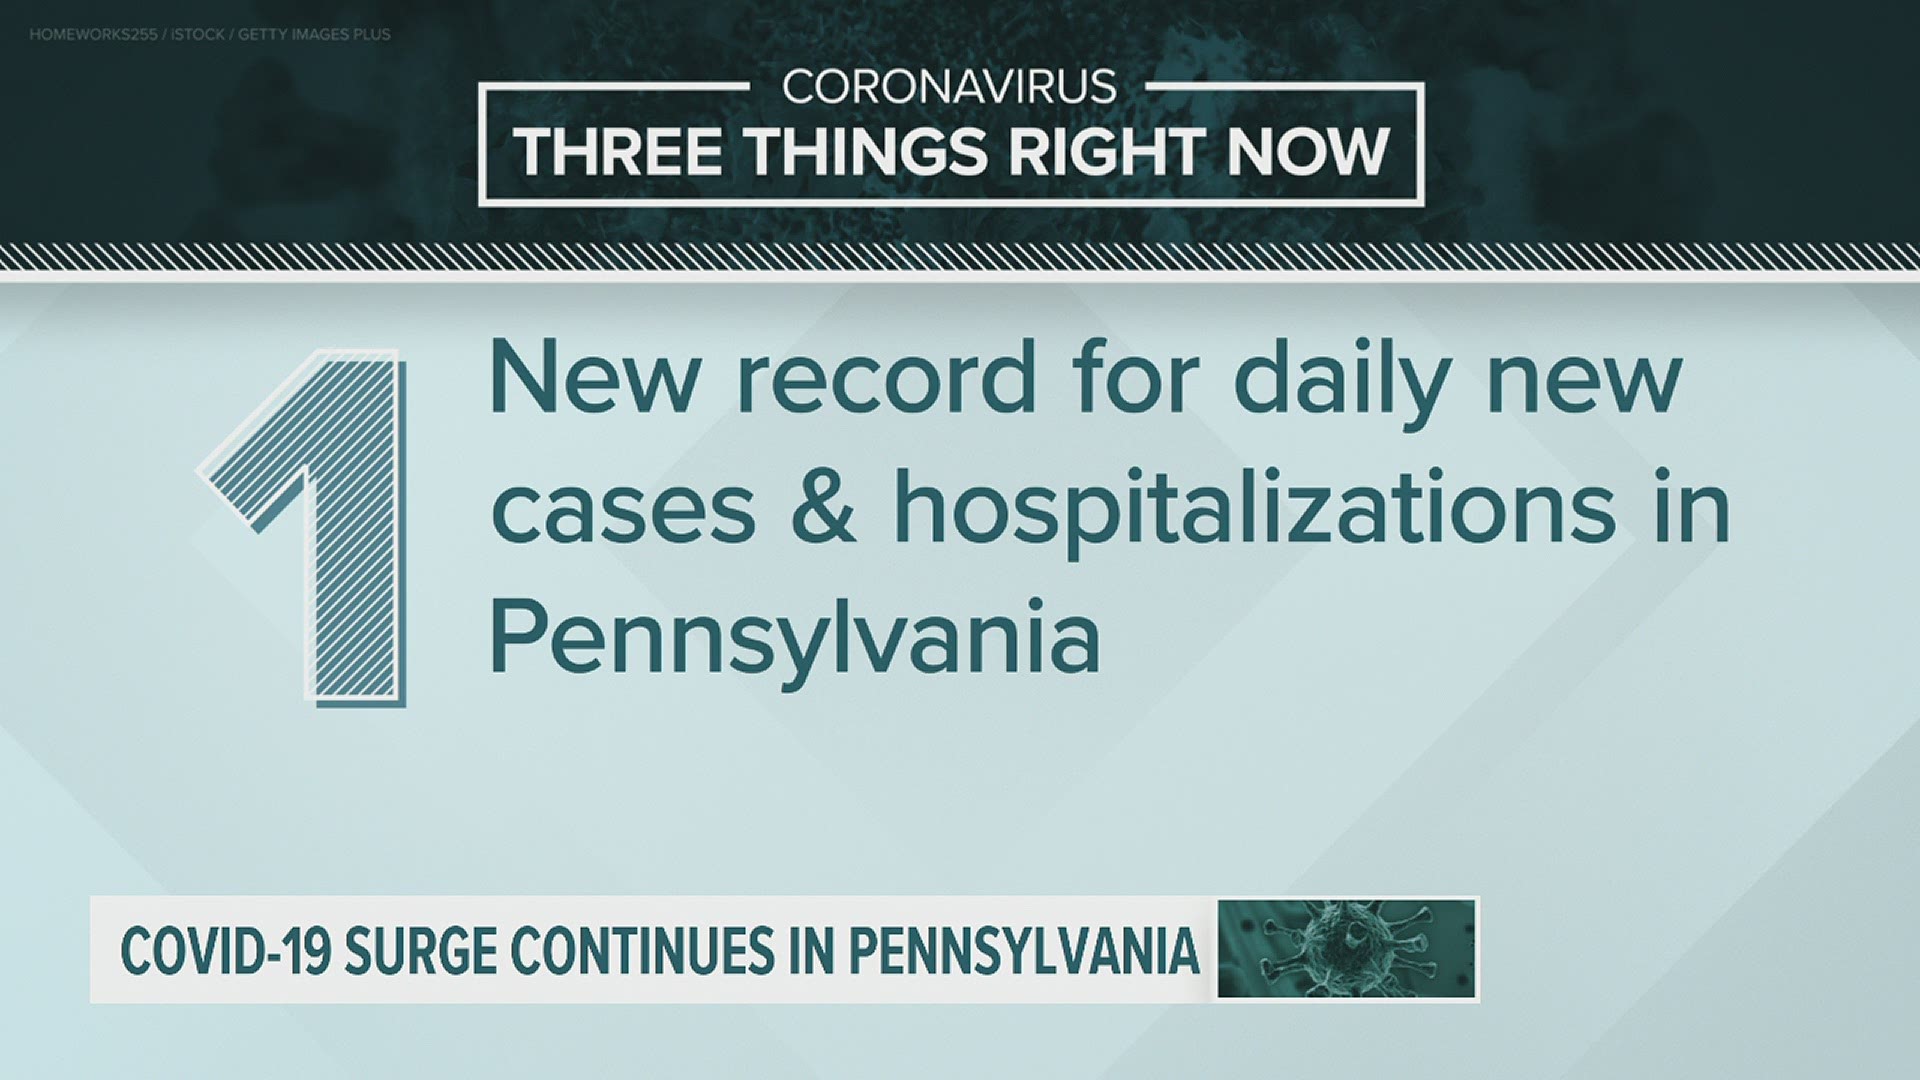 The statewide total of COVID-19 cases is now 386,837 with 10,944 deaths since the virus hit.